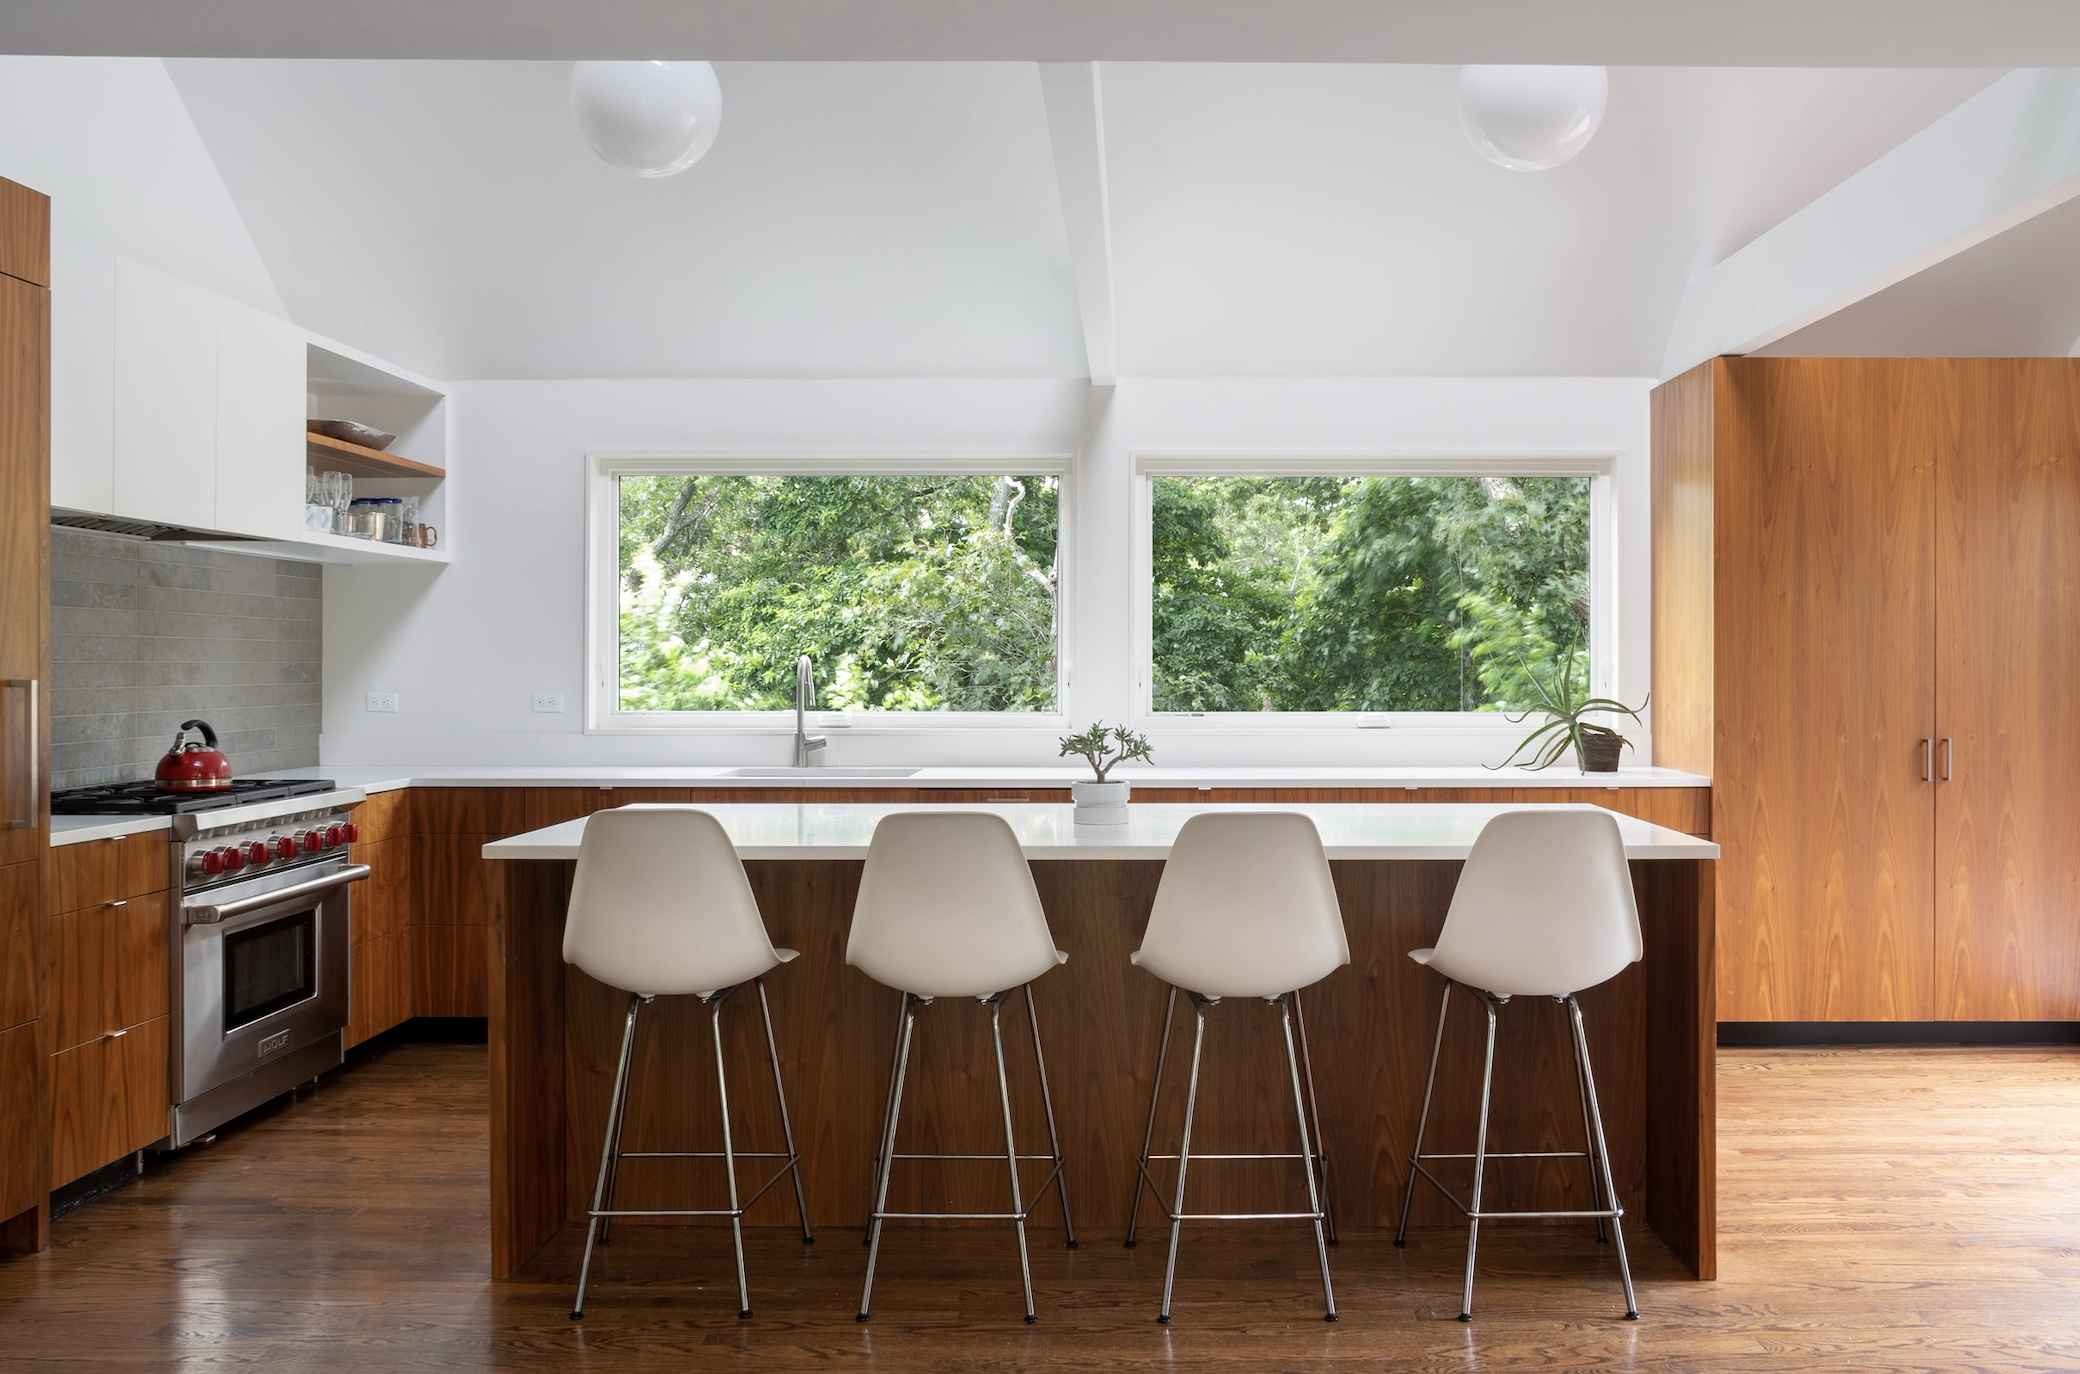 Interior view of the kitchen area with modern white furnishings and walls at Morris Island Residence on Morris Island in Chatham, Massachusetts featuring Kebony Modified Wood Clear Cladding throughout the design